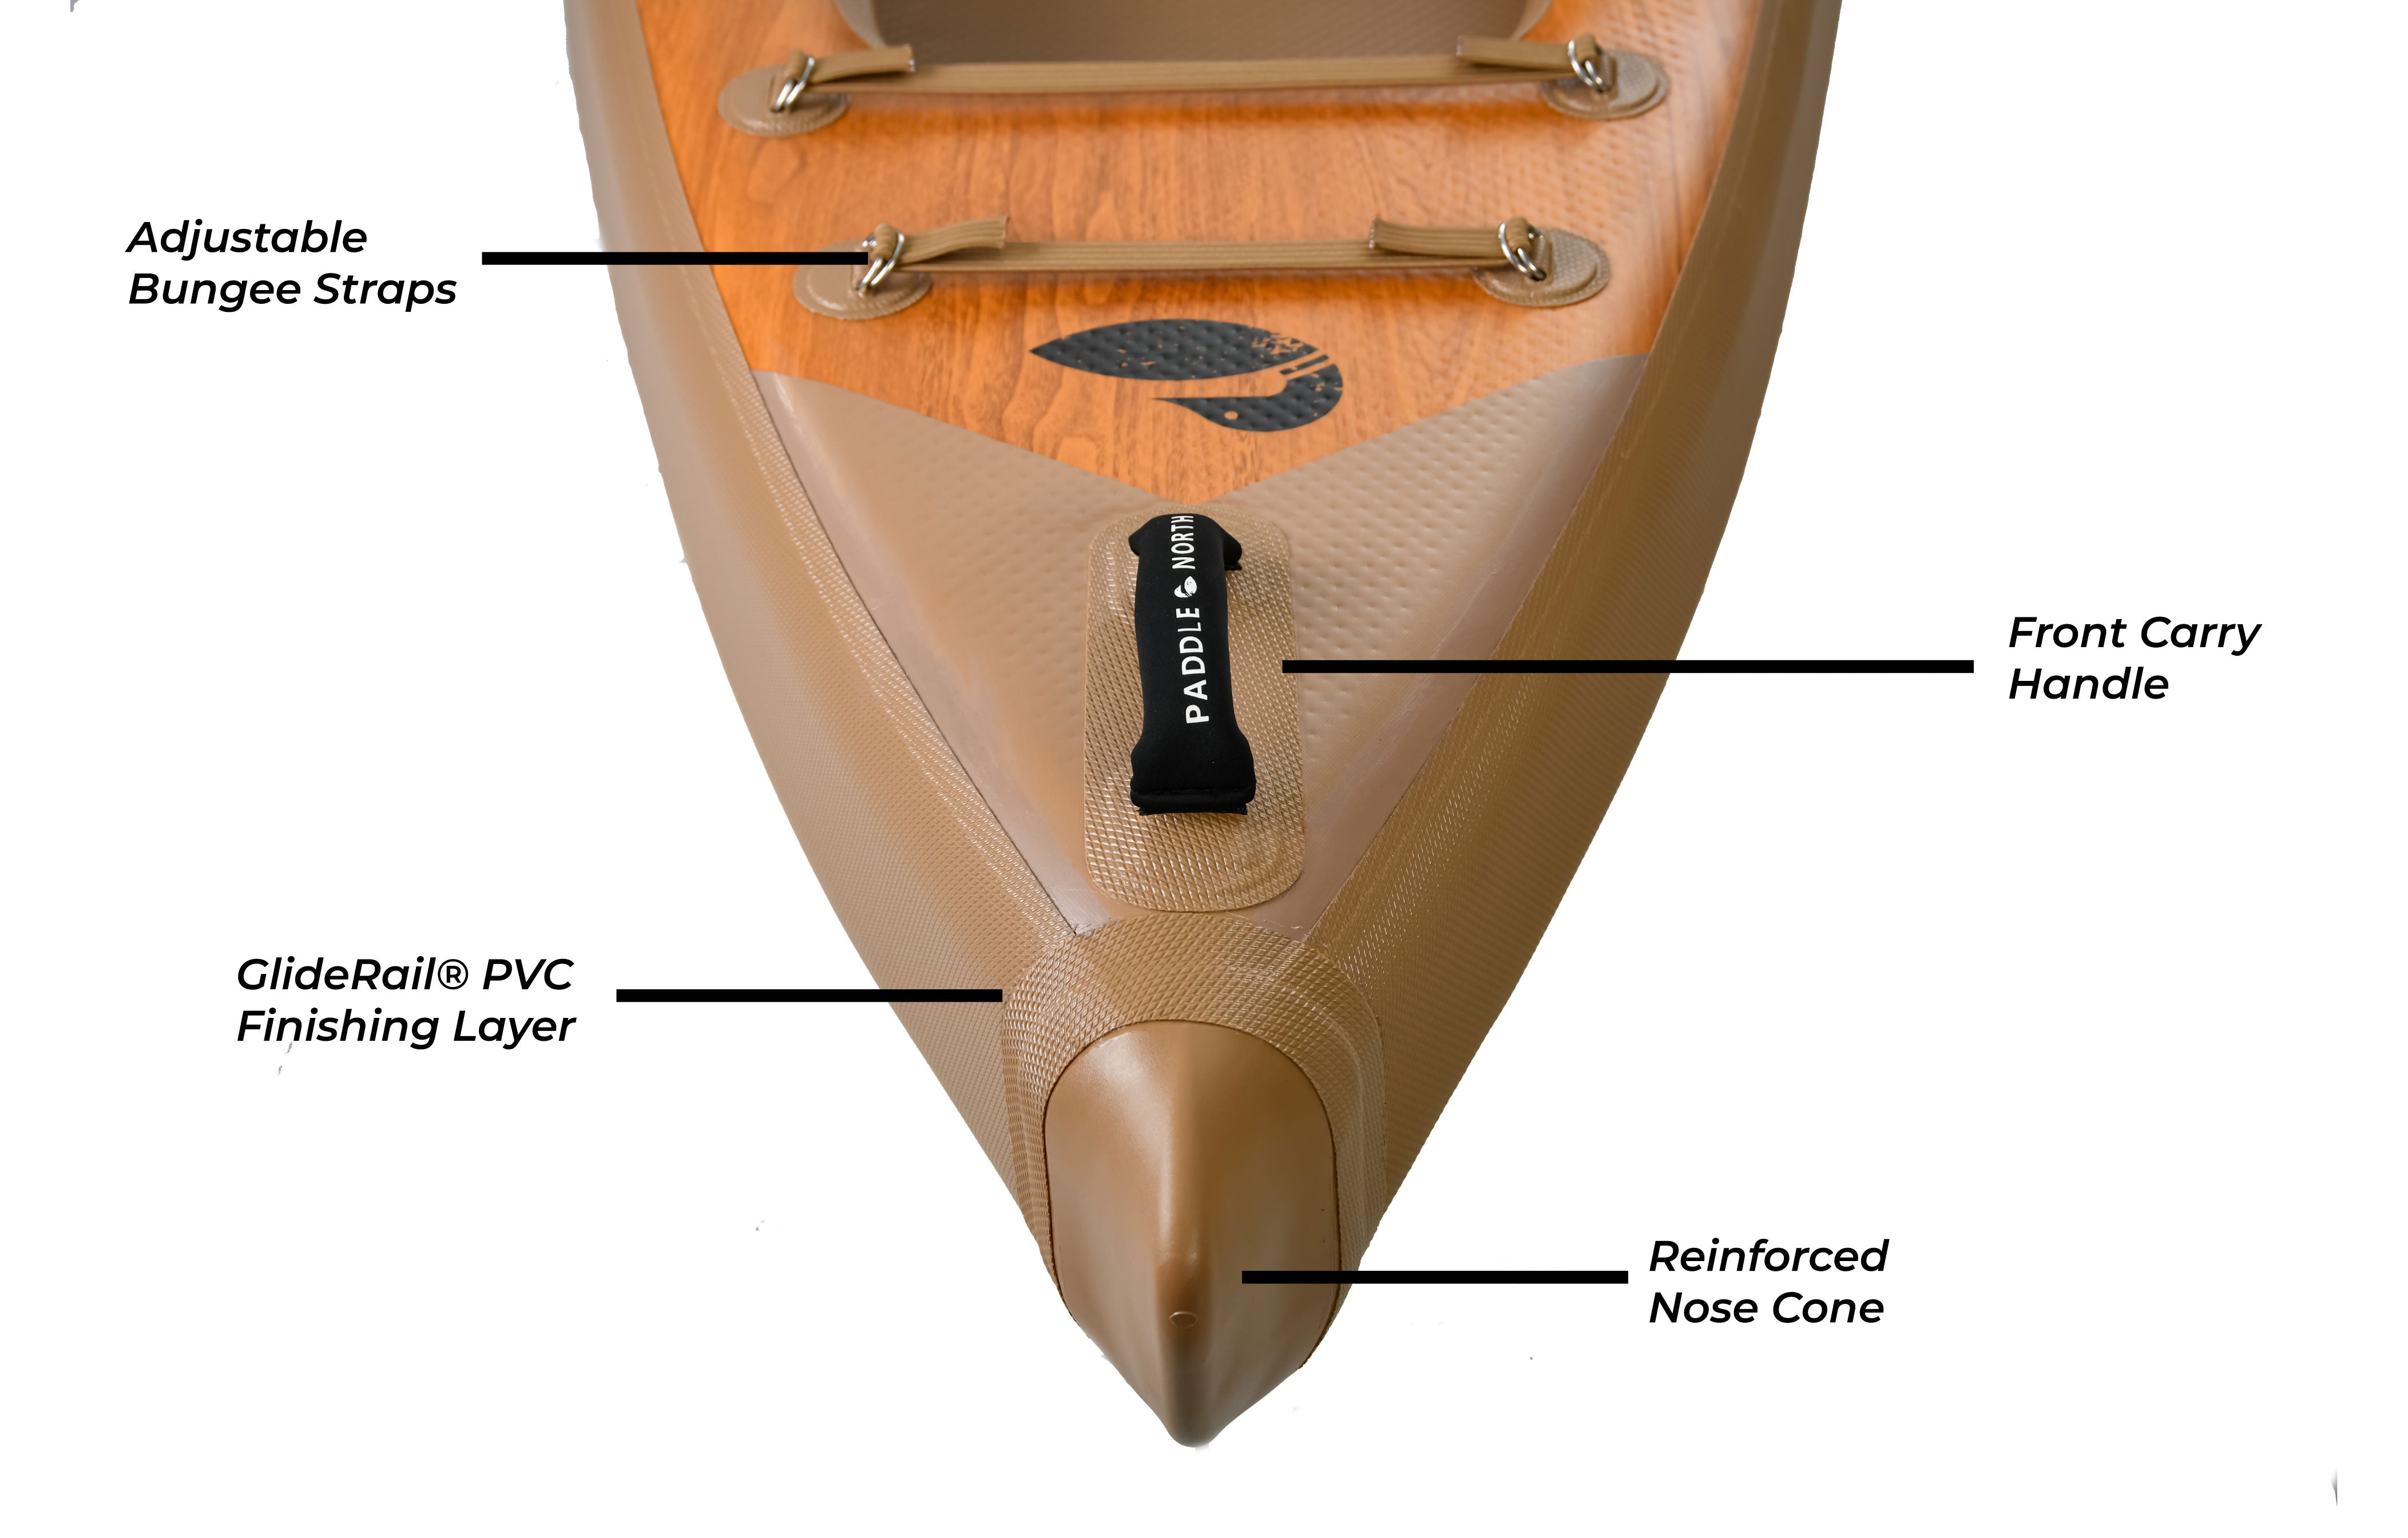 Karve XL inflatable tandem kayak features, adjustable bungee straps, front carry handle, reinforced PVC side rail, and nose cone